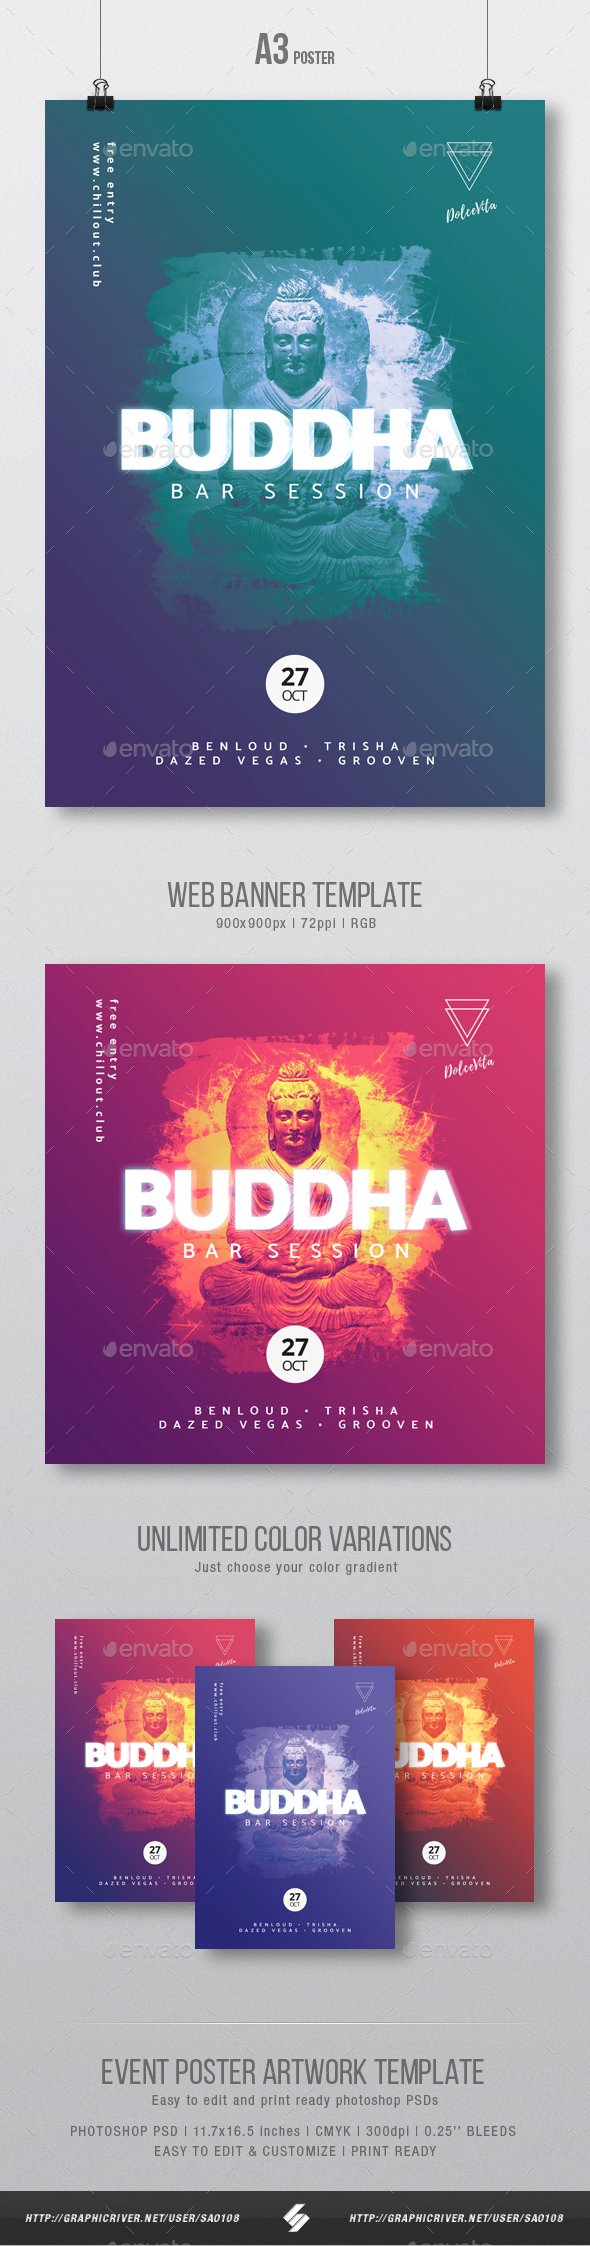 GraphicRiver Buddha Bar 3 Chillout Session Flyer Poster Artwork Template A3 20846633